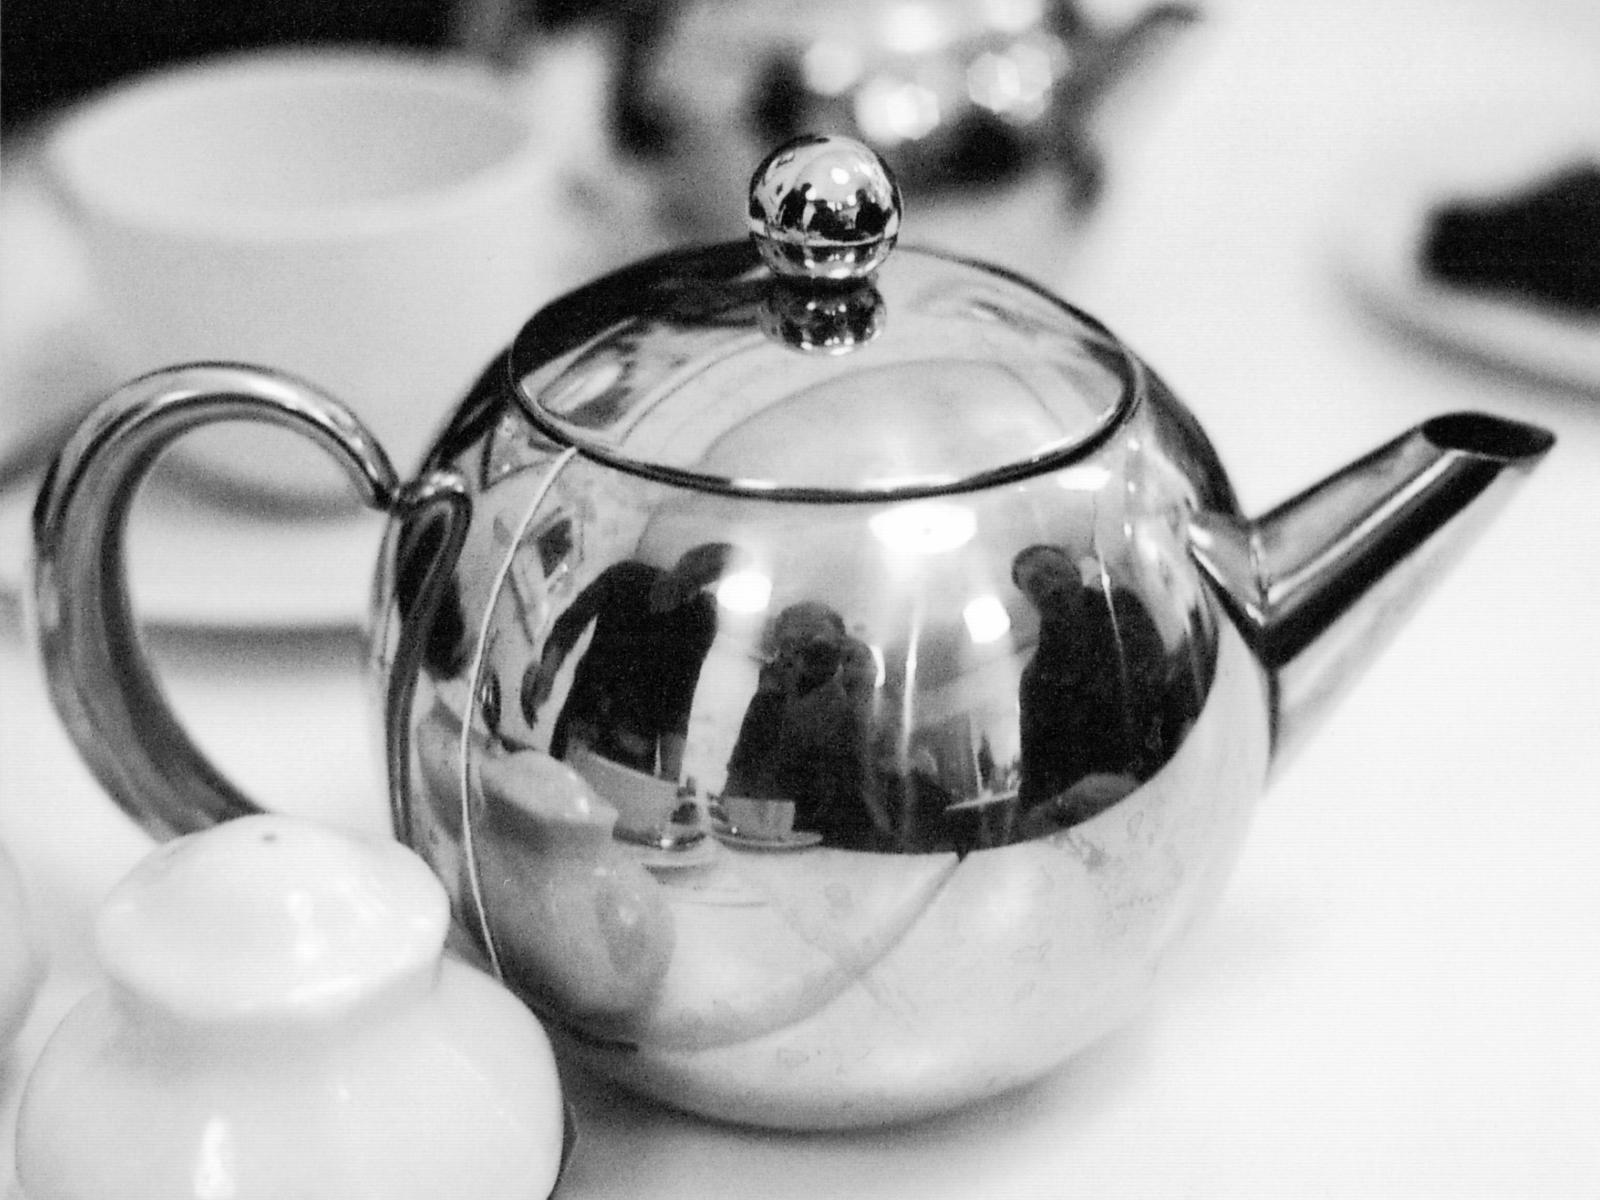 a silver tea pot sitting on a table